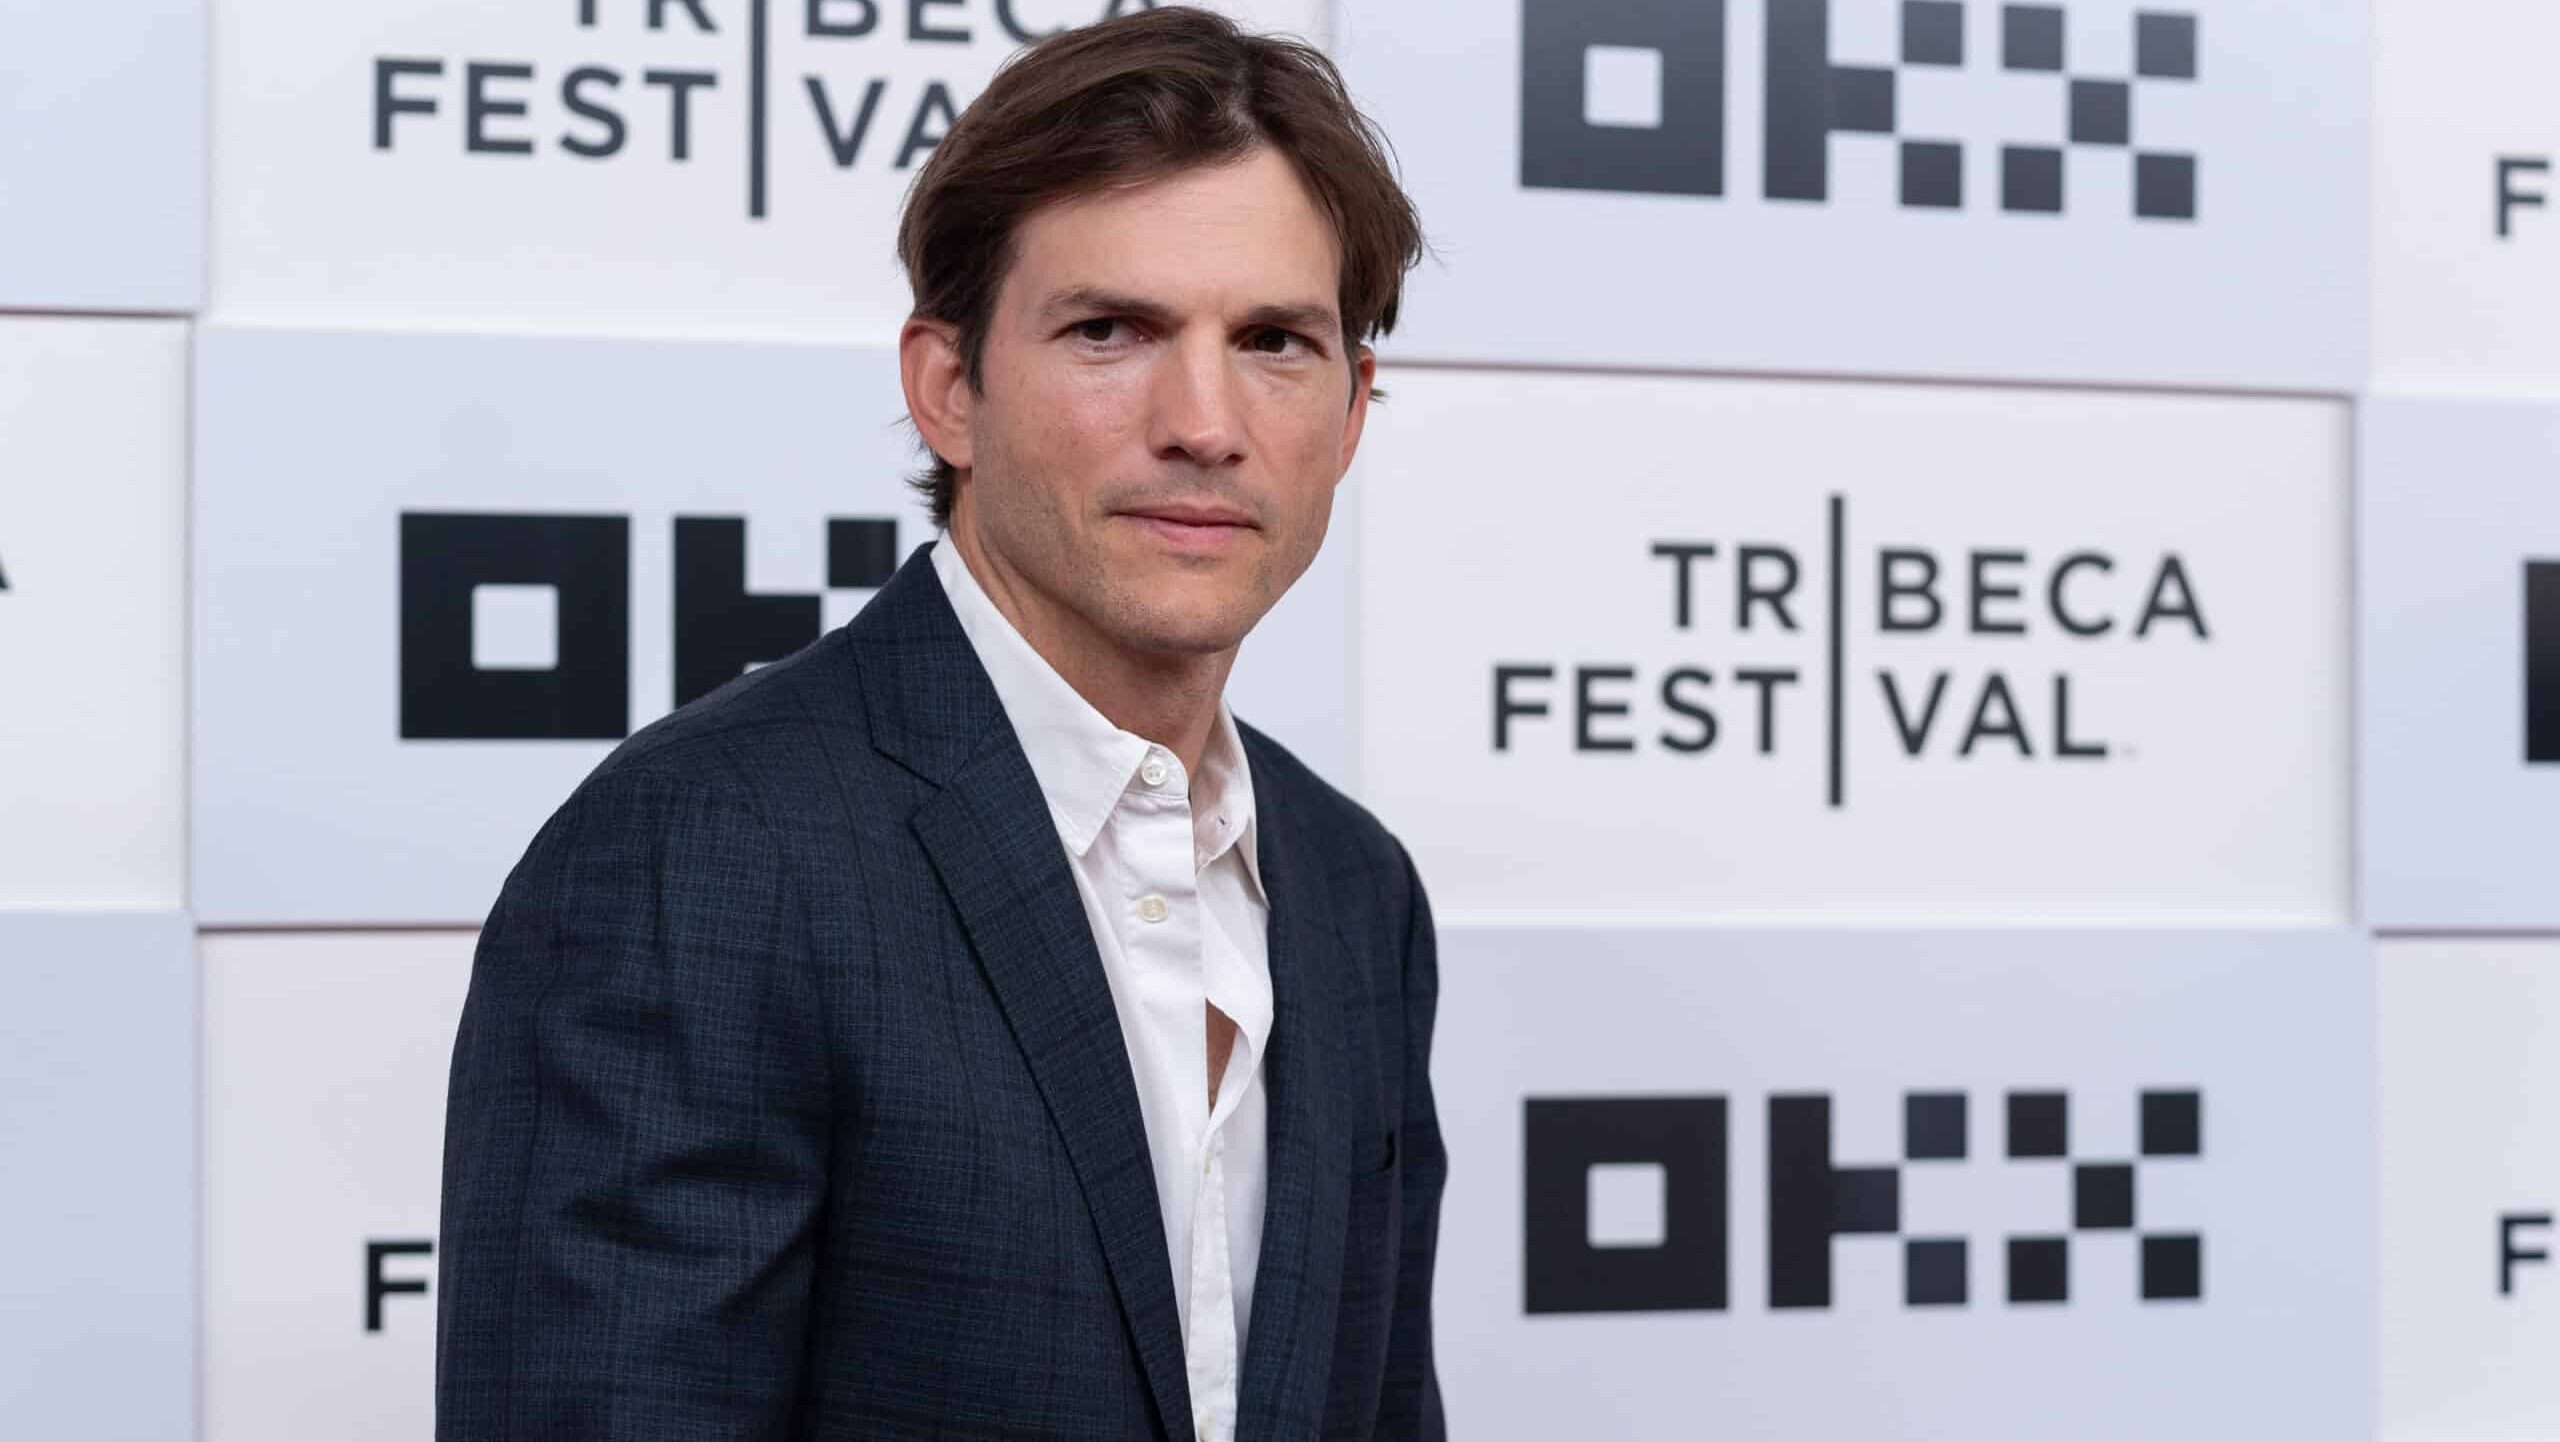 Actor Ashton Kutcher attends the premiere of "Vengeance" during the 2022 Tribeca Festival at BMCC Tribeca PAC on June 12, 2022 in New York City.